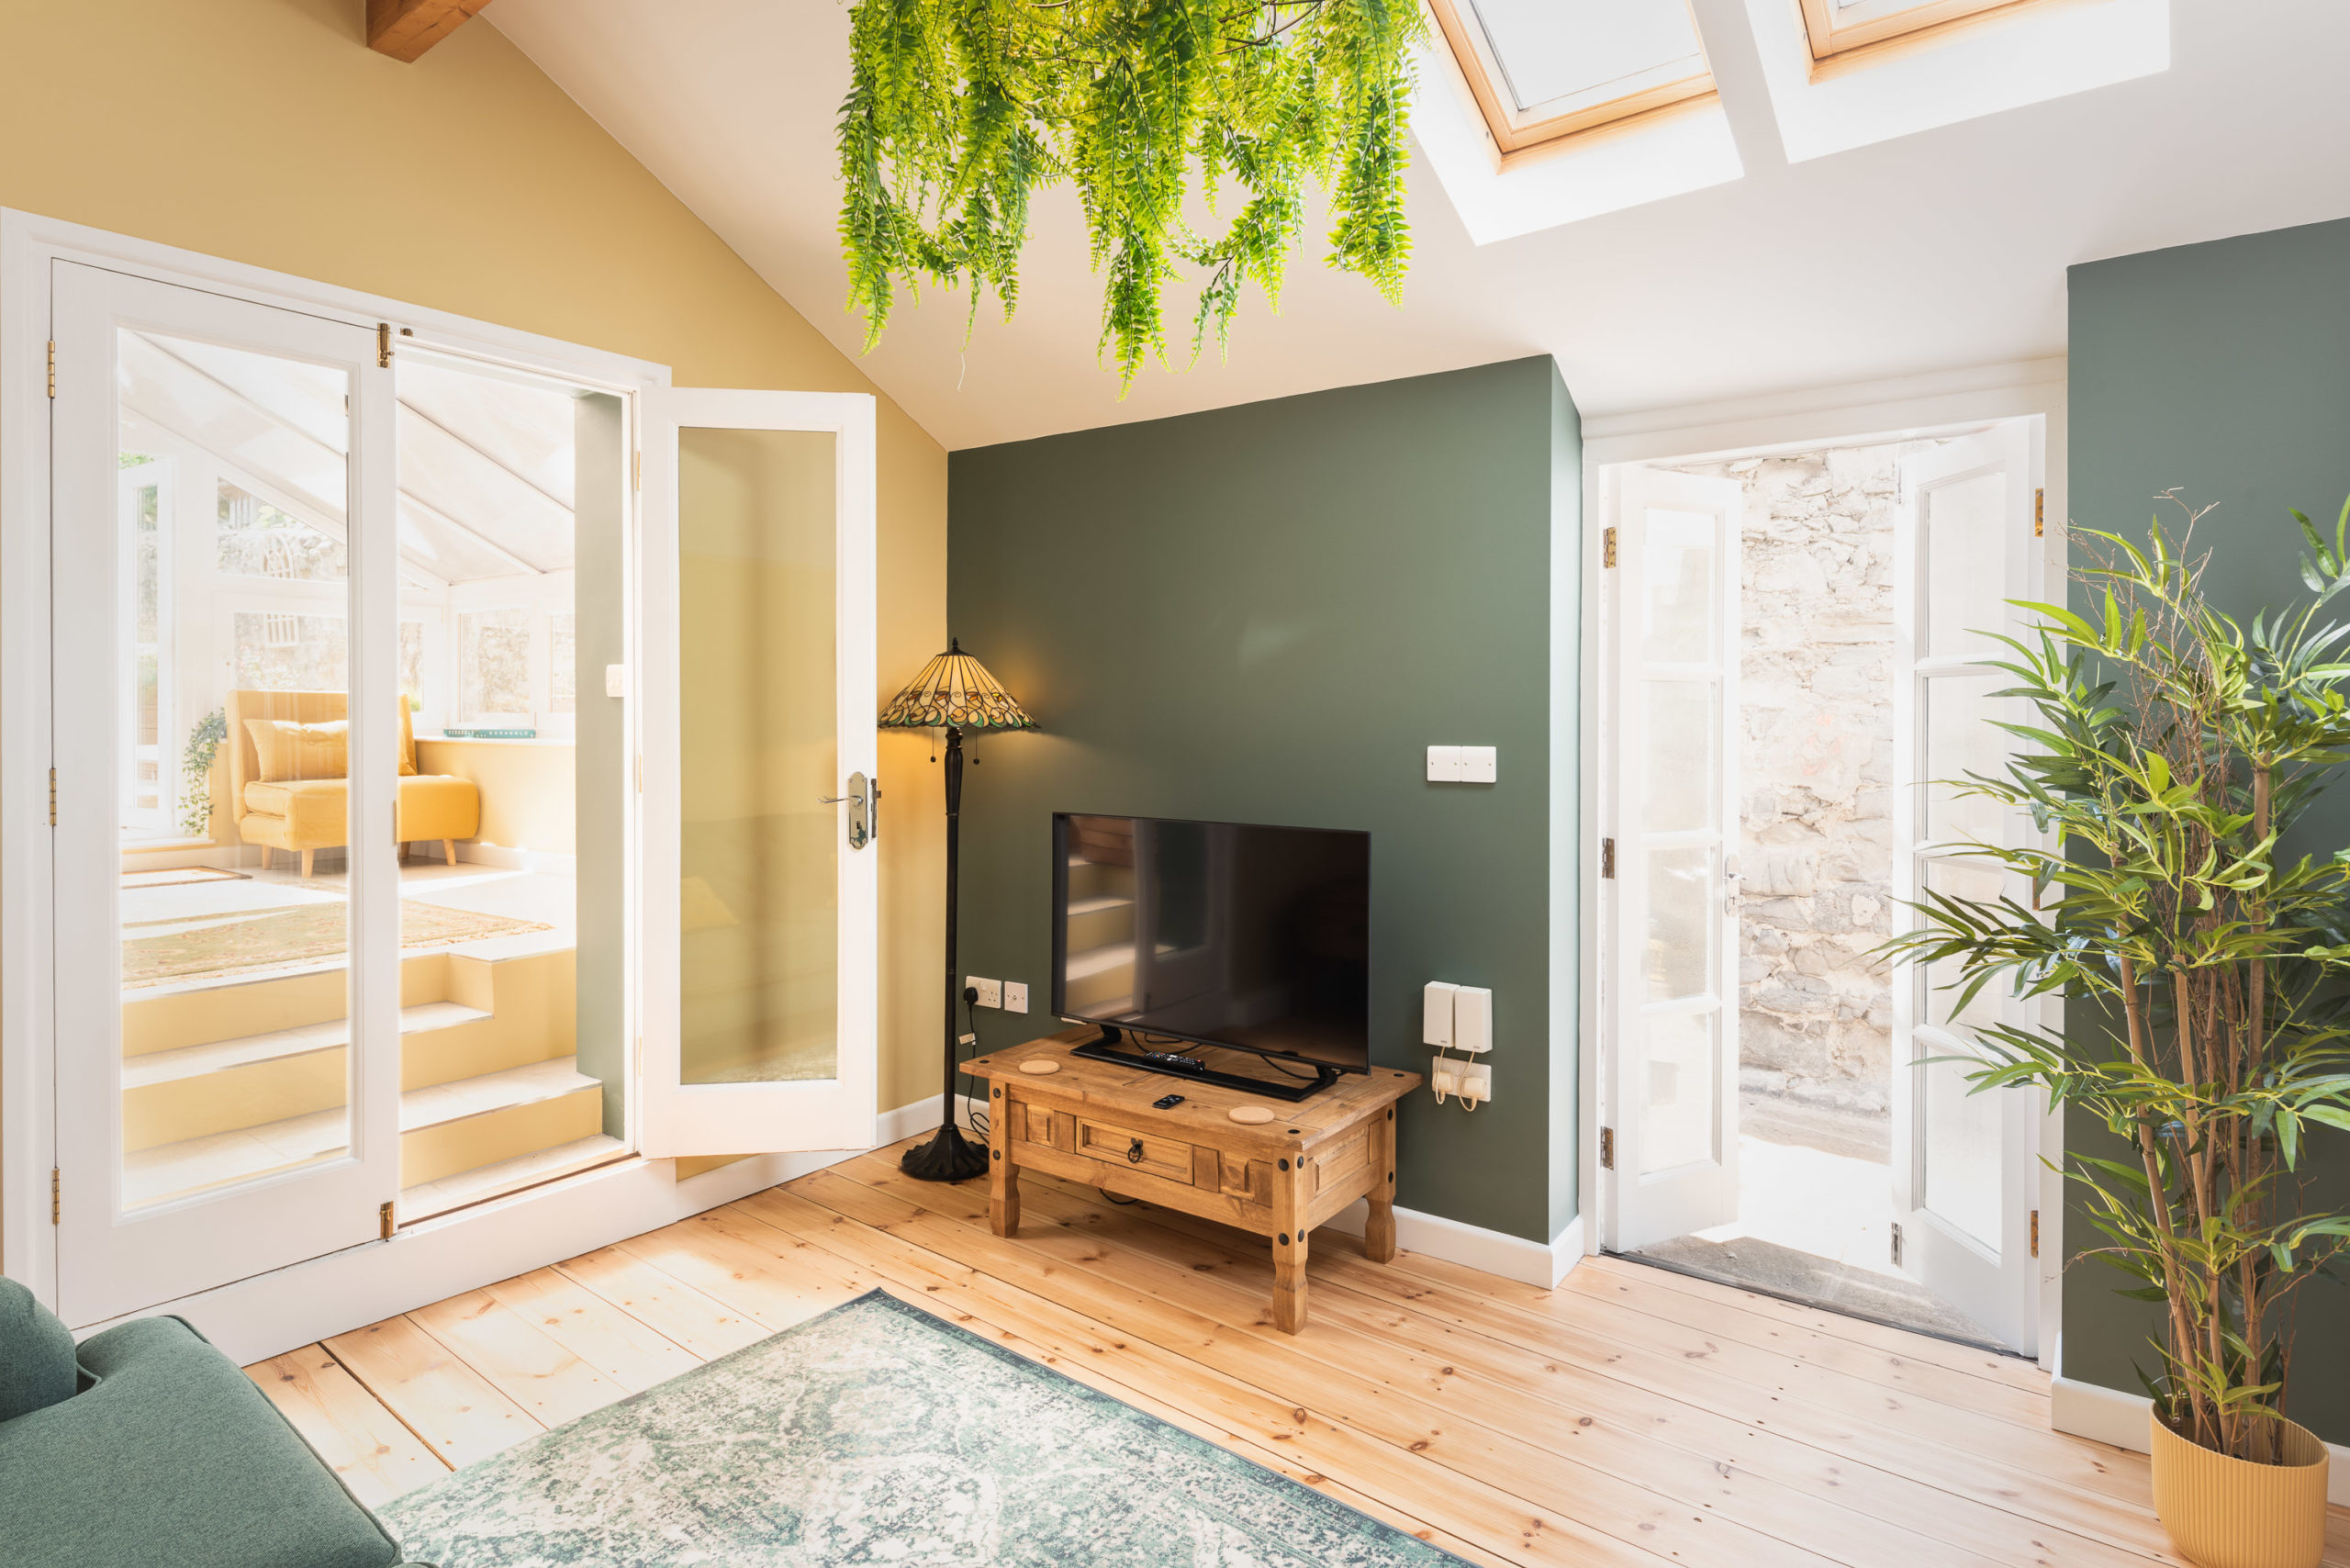 lyme regis holiday cottage living area with smart tv and bold green decor